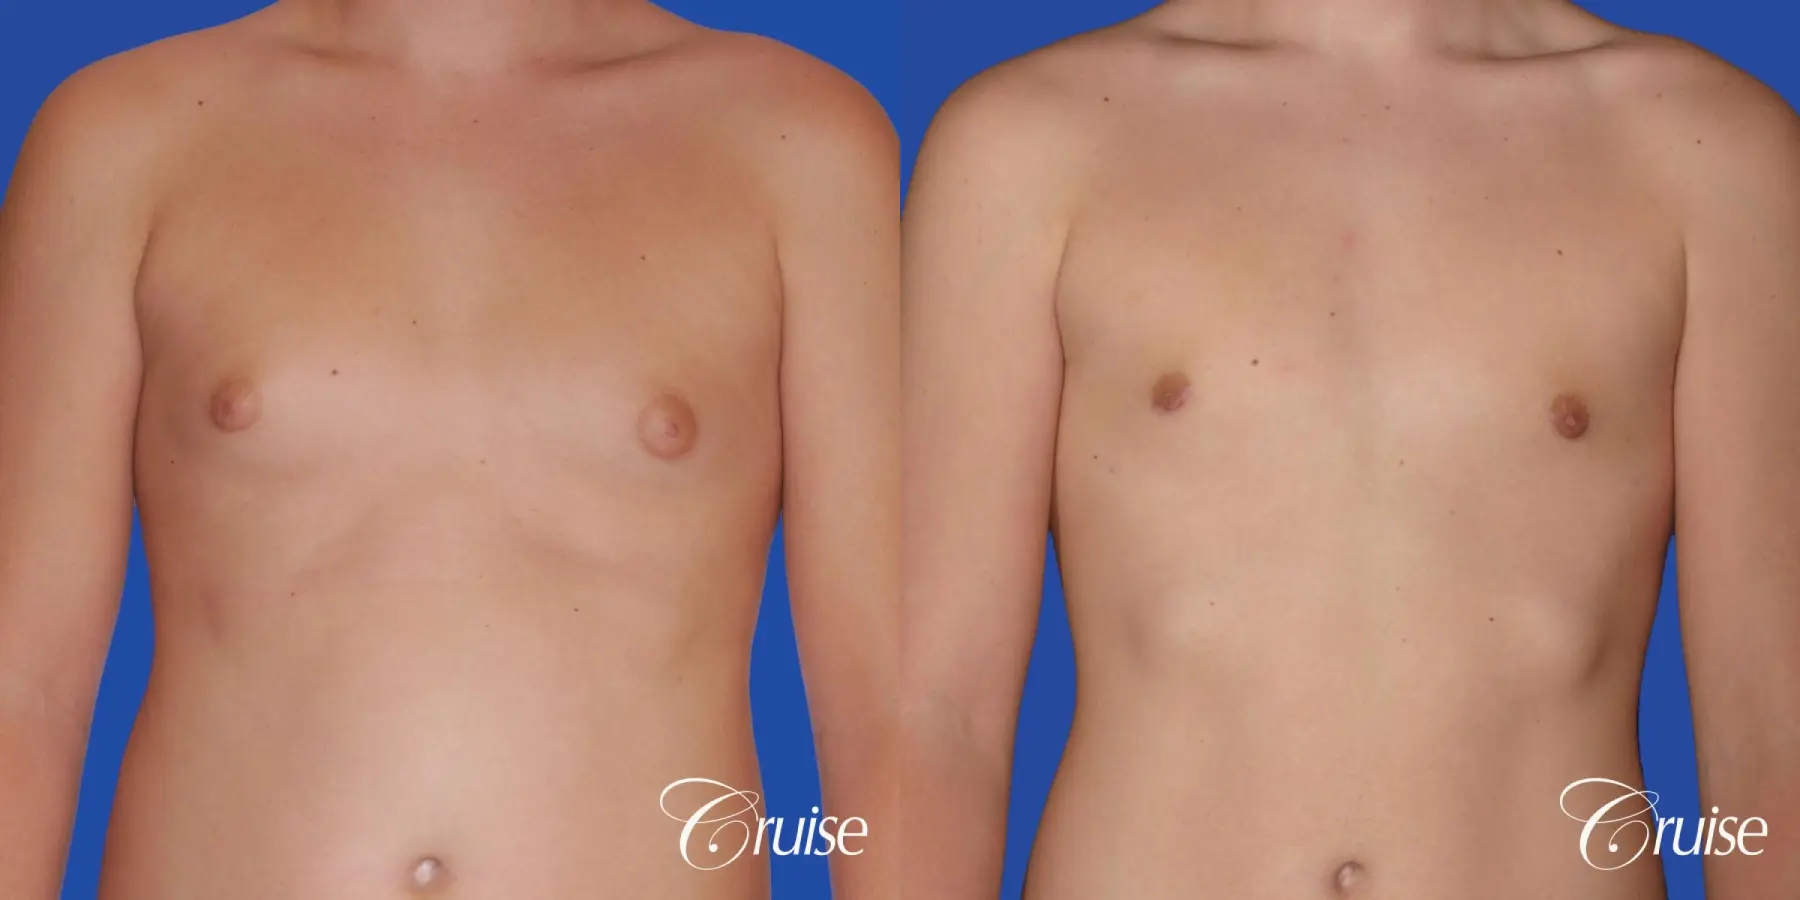 teen with pointy / puffy nipples get gynecomastia surgery - Before and After 1